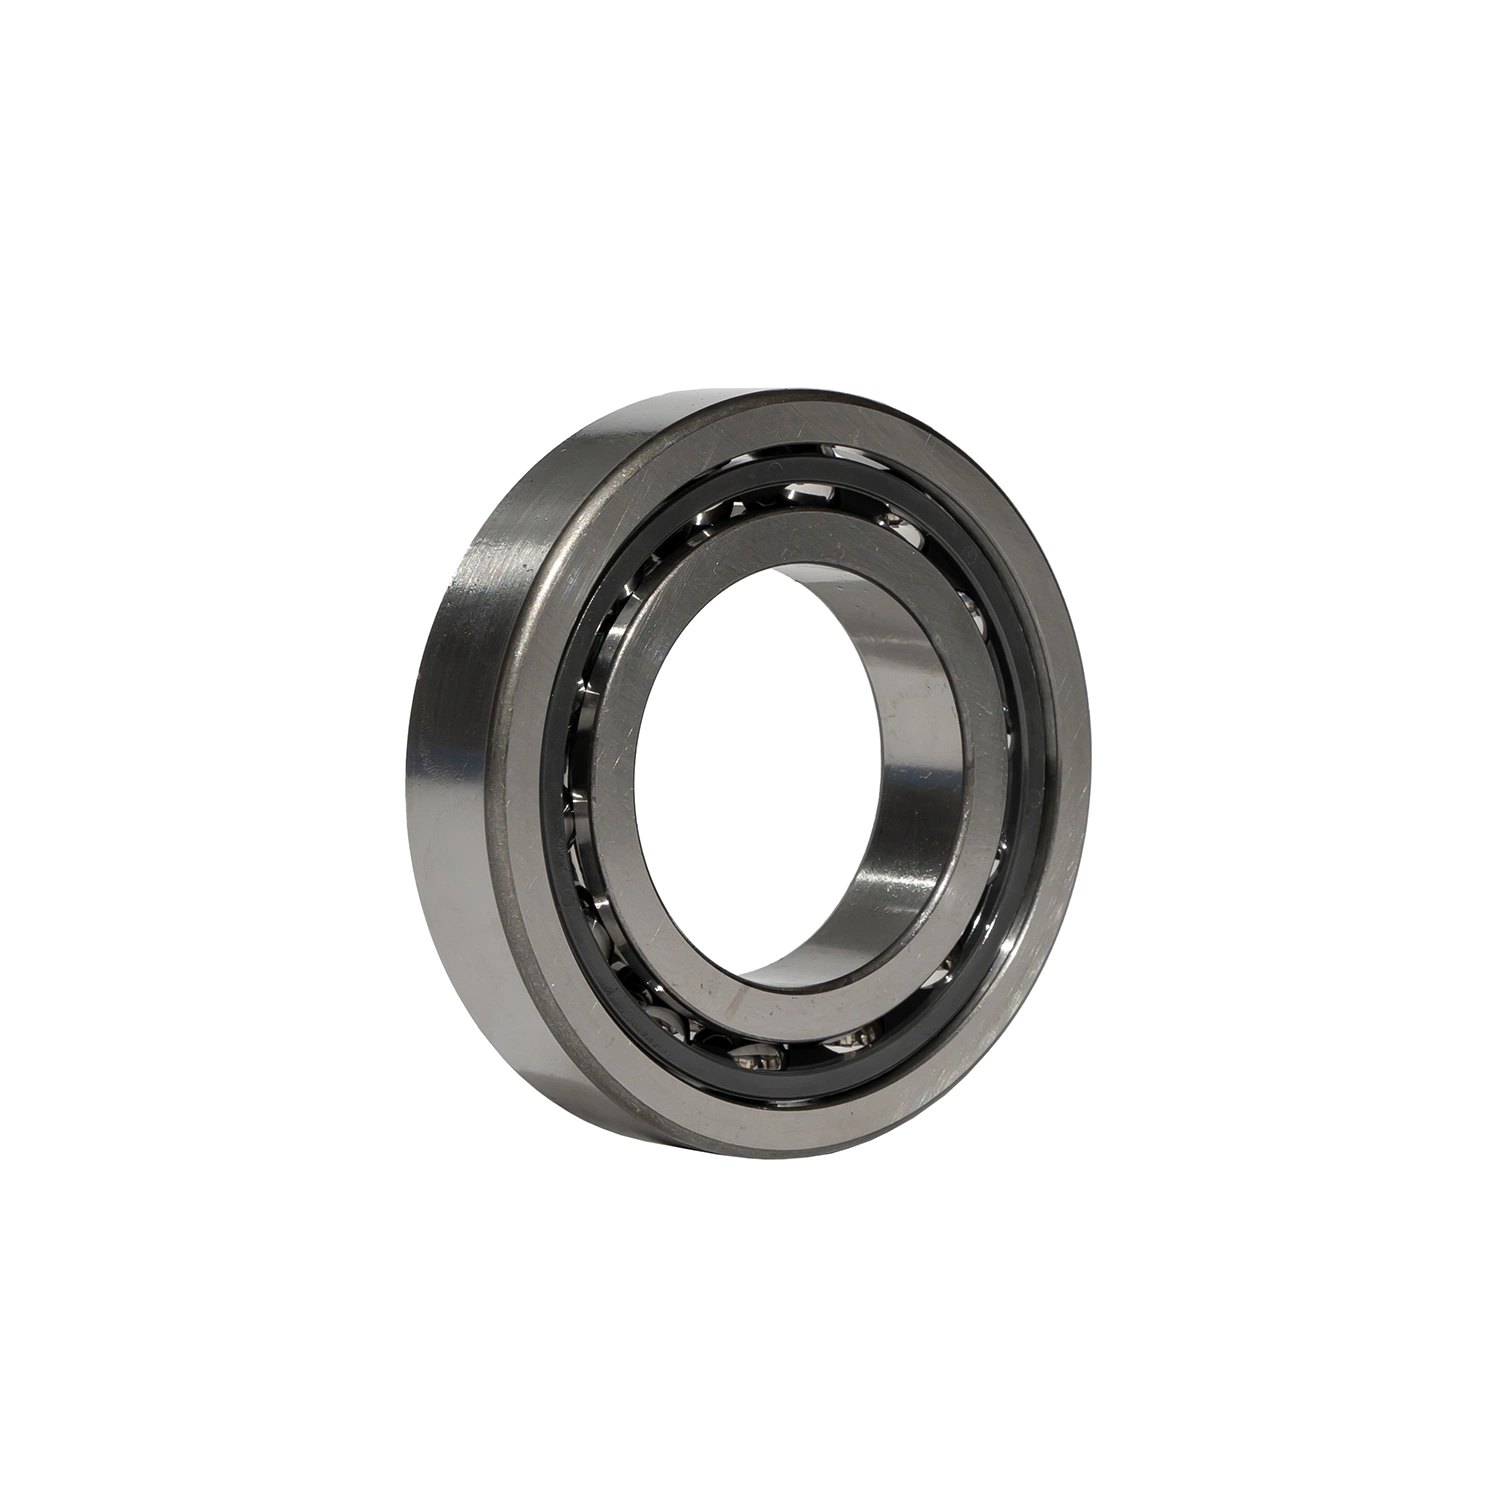 7200c/AC/B High-Speed Angular Contact Ball Bearings 50*80*16mm P6/P5/P4/P2 Used in Machine Tool Spindles